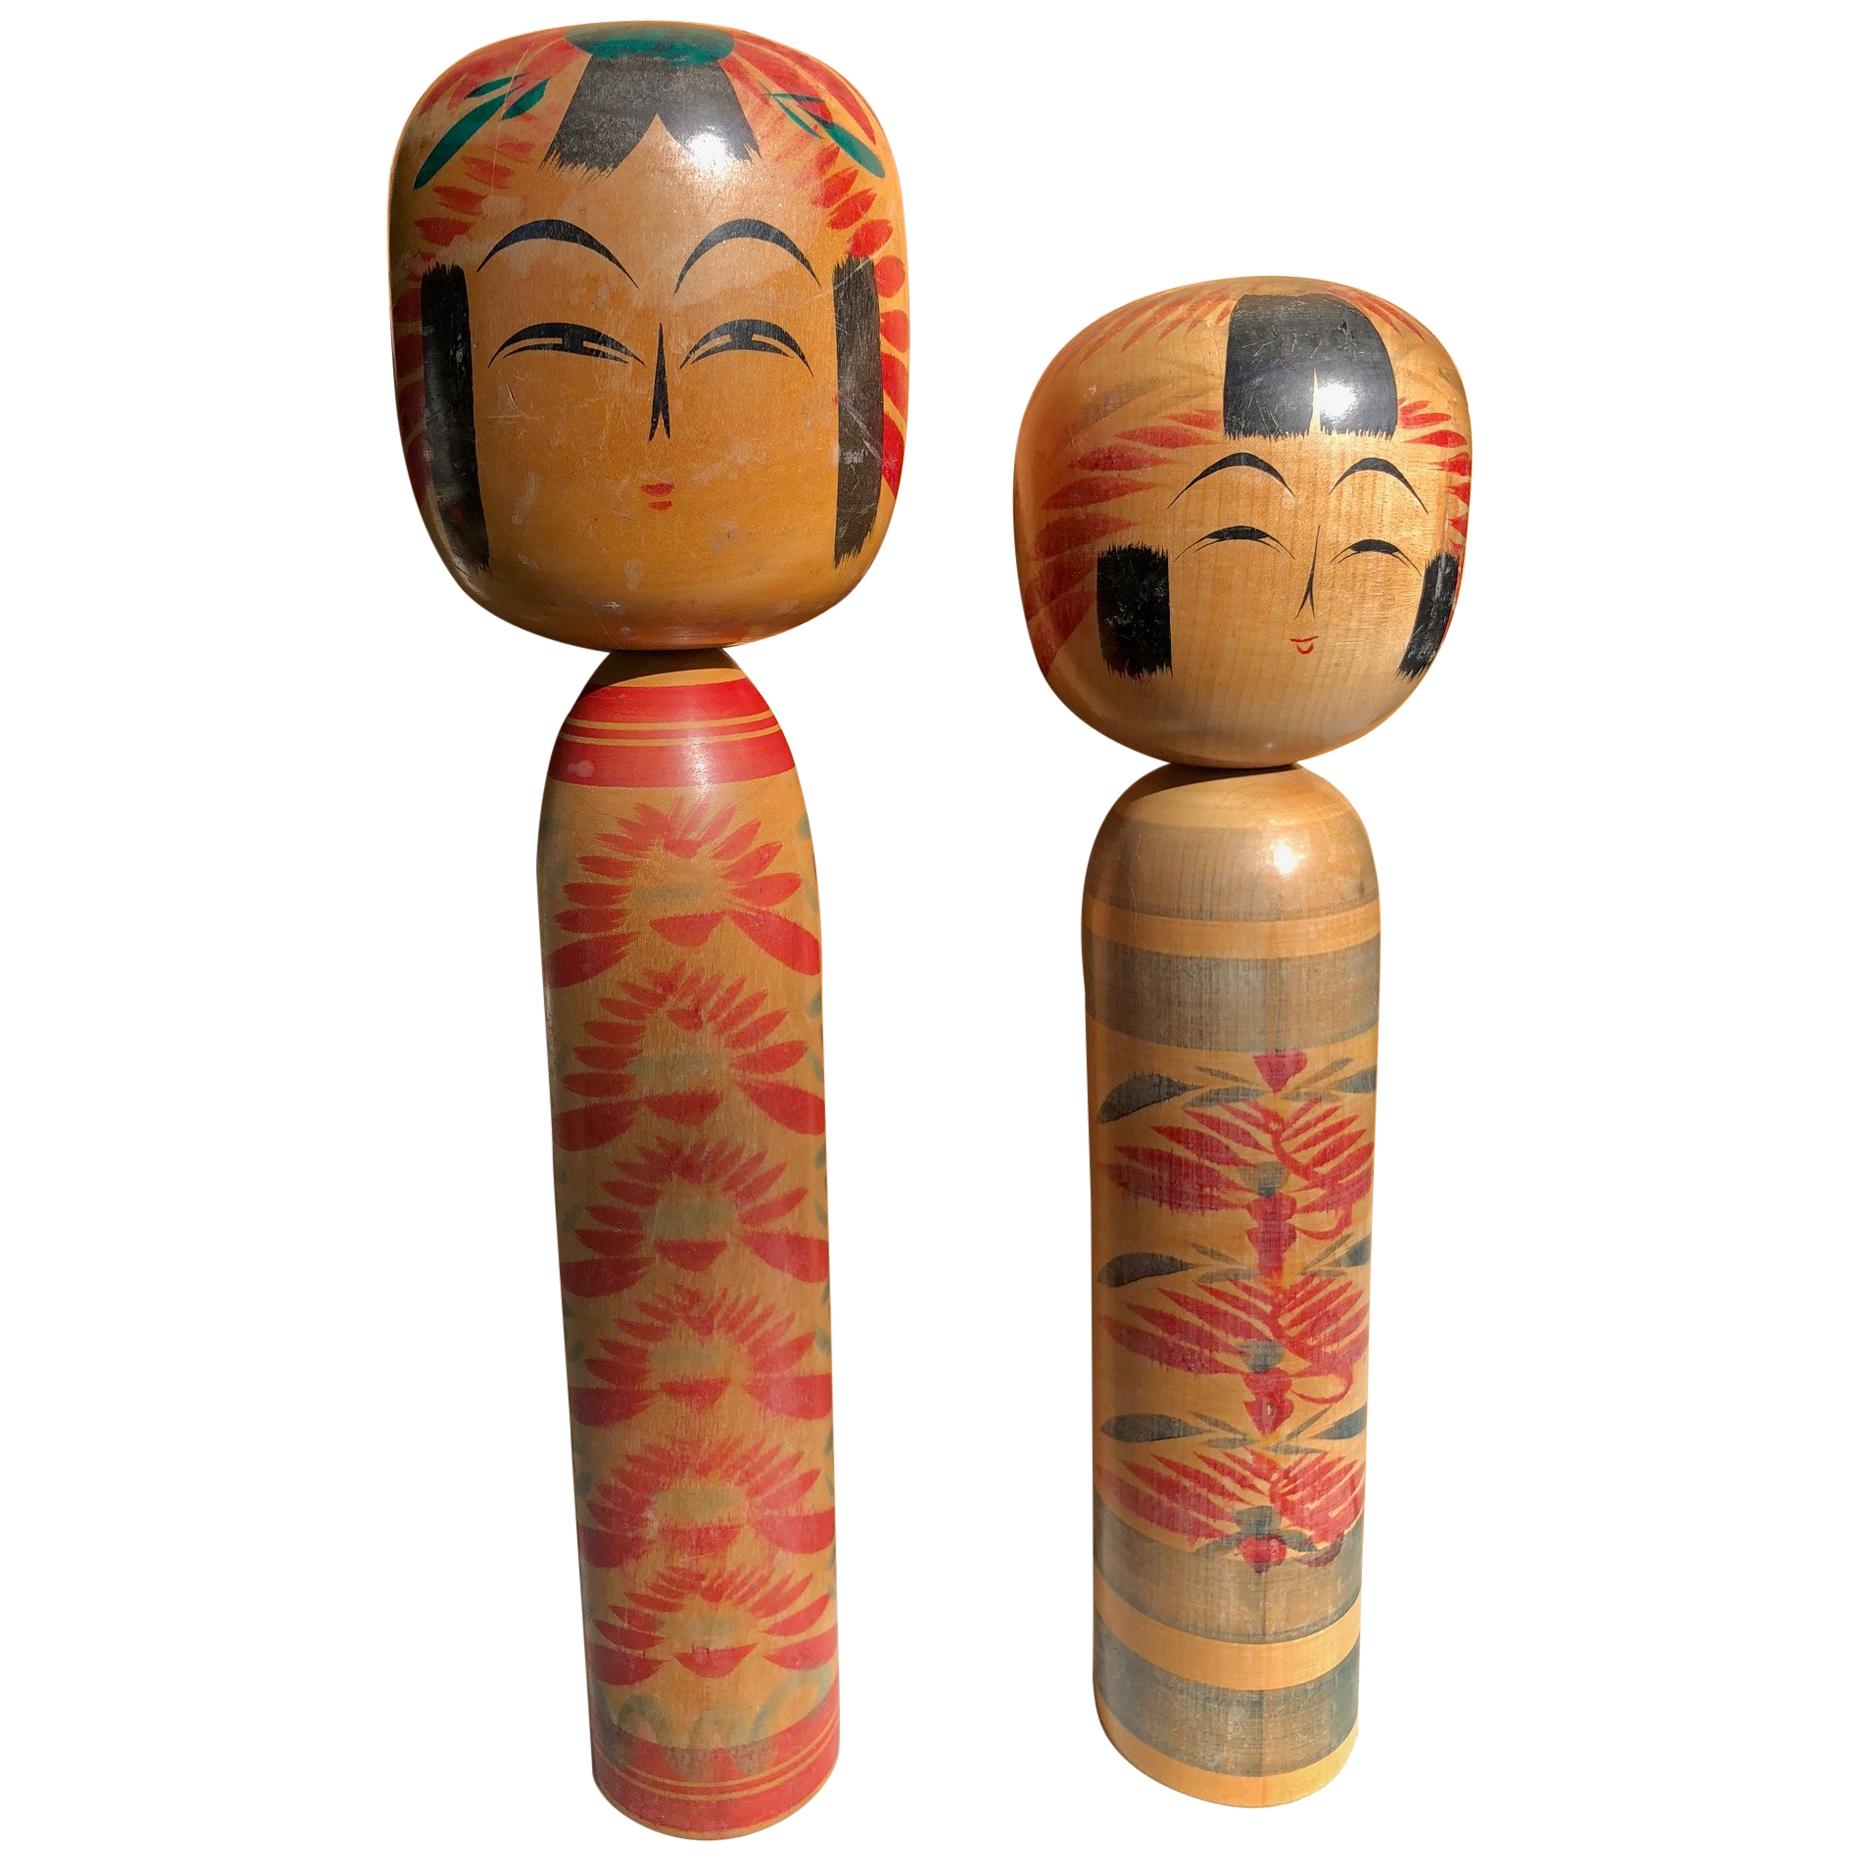 Charming Japanese Hand-Painted Pair of Tall Famous Kokeshi Dolls Mint and Signed